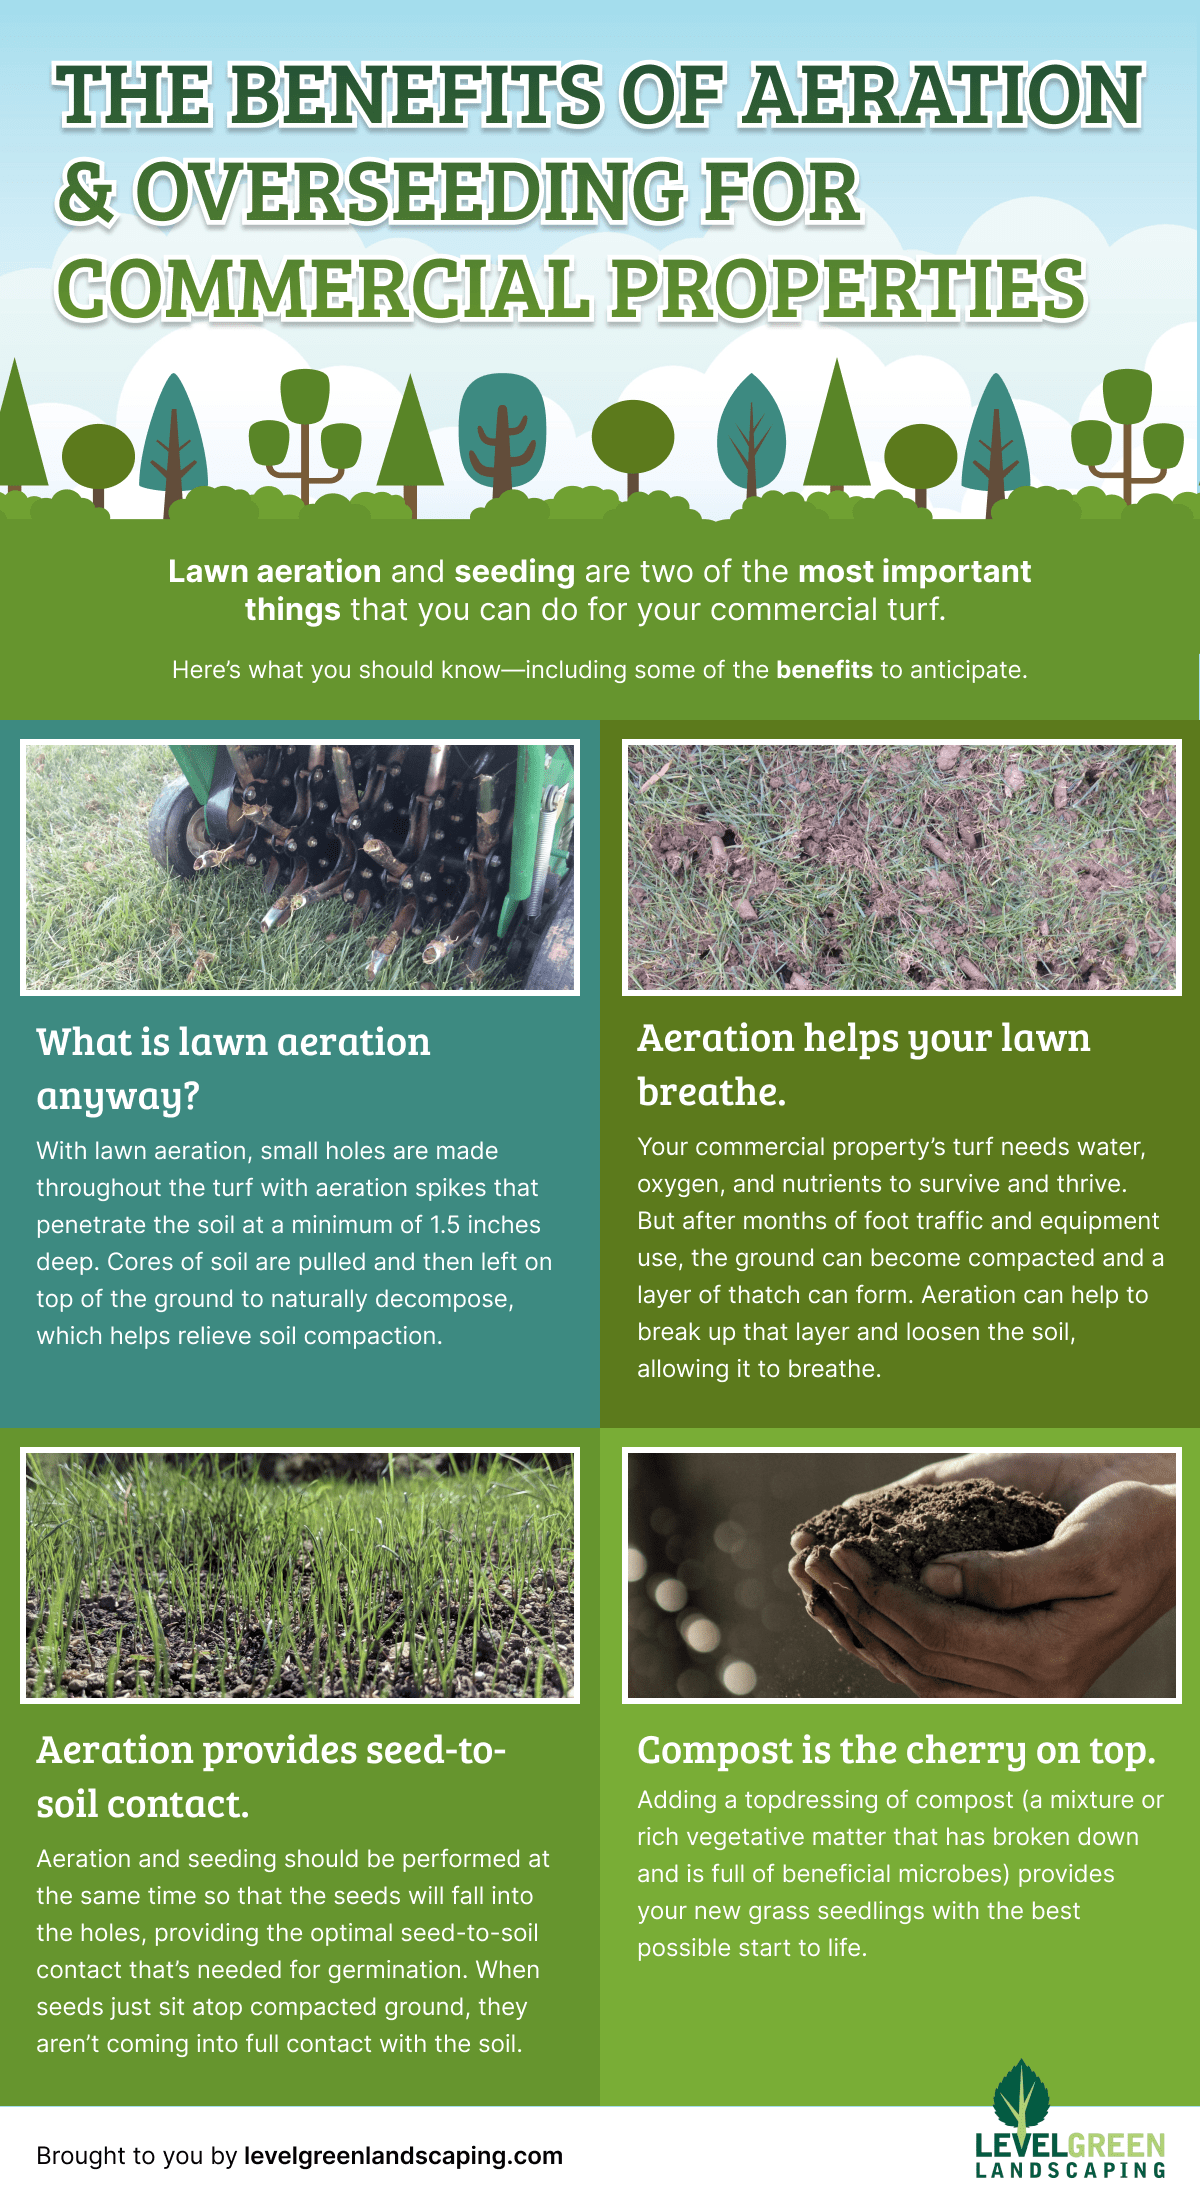 Aeration and Overseeding Infographic by Level Green Landscaping